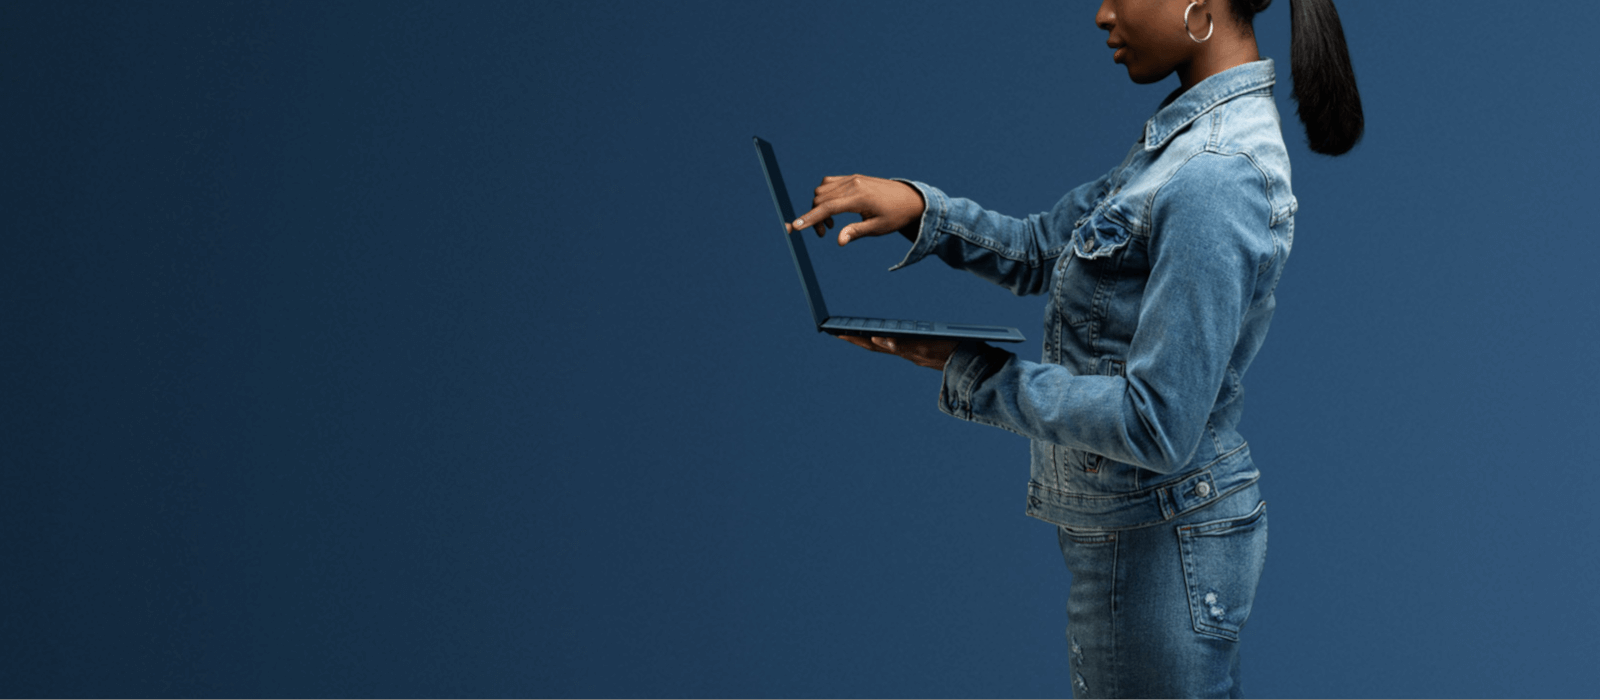 A woman is touching the display of the cobalt-blue Surface Laptop 